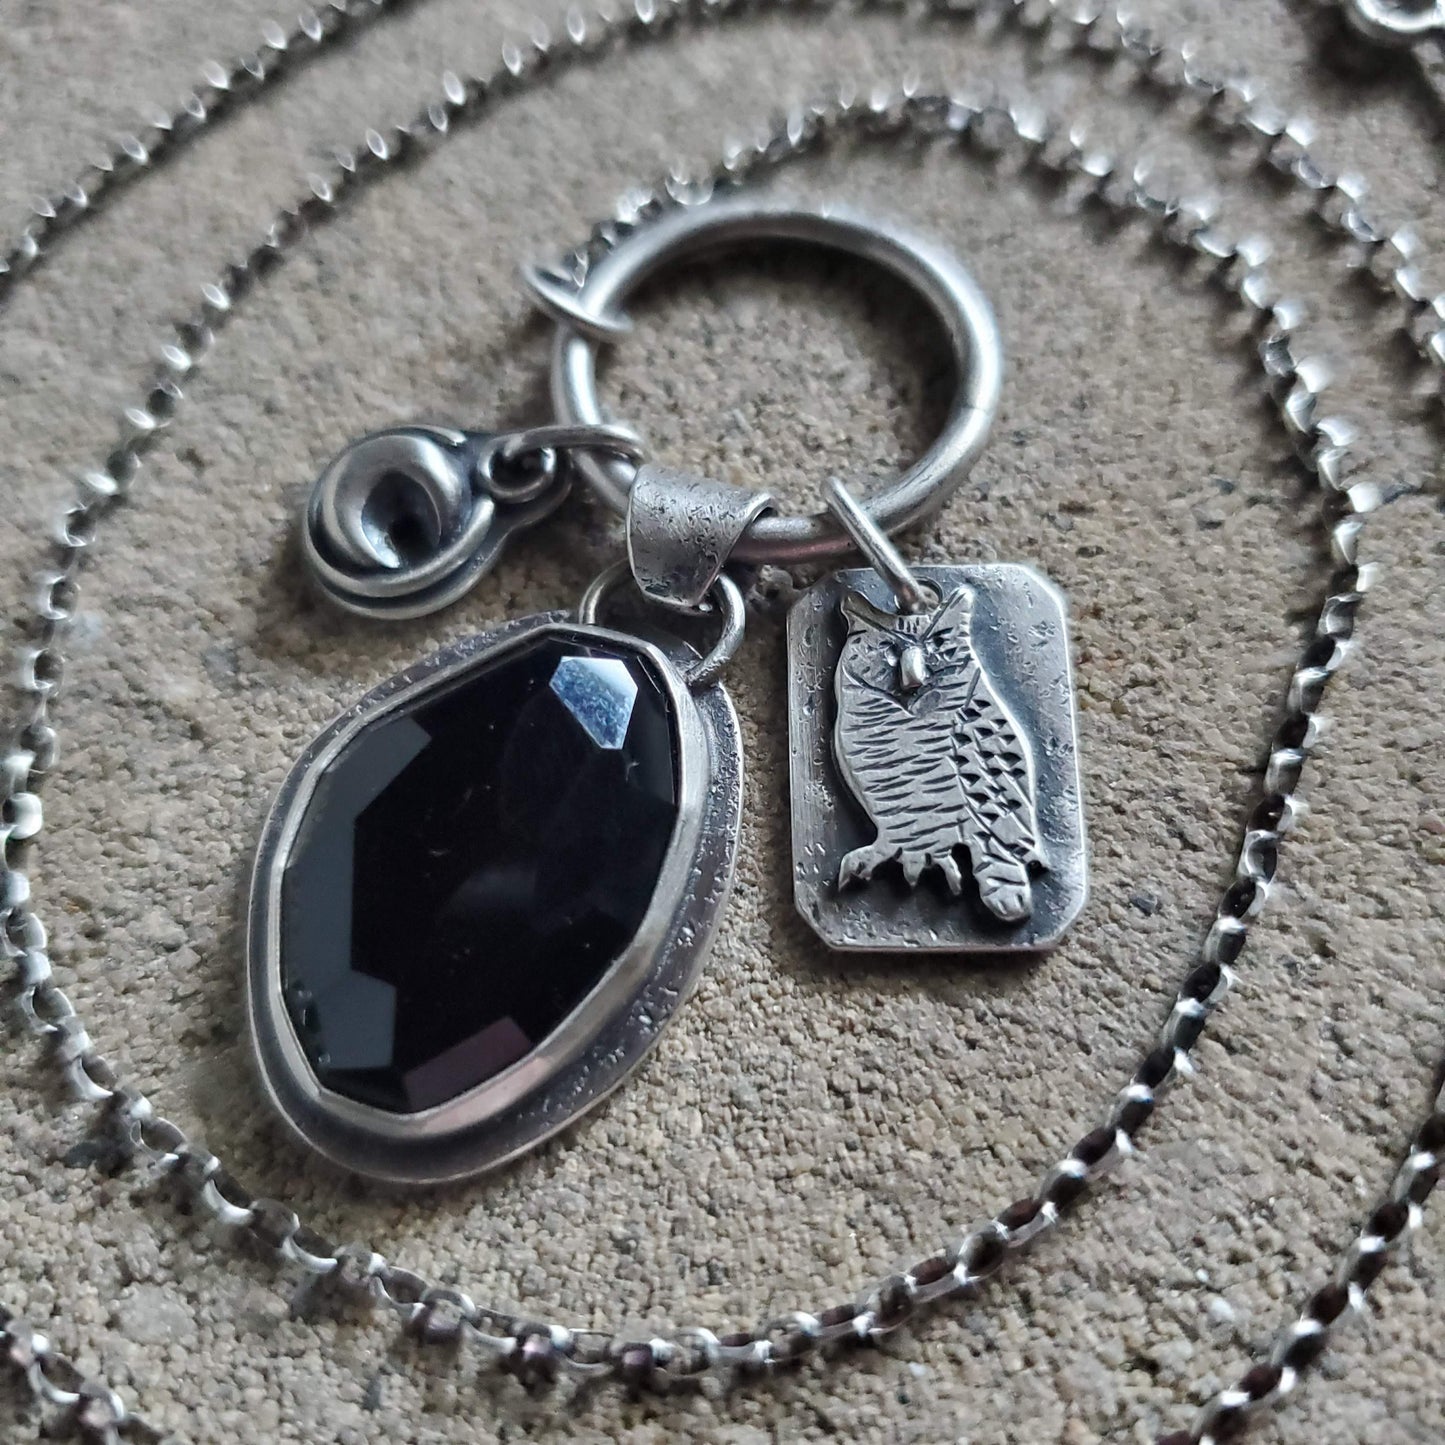 Night Flight Charm Necklace with Faceted Obsidian, Crescent Moon and Owl